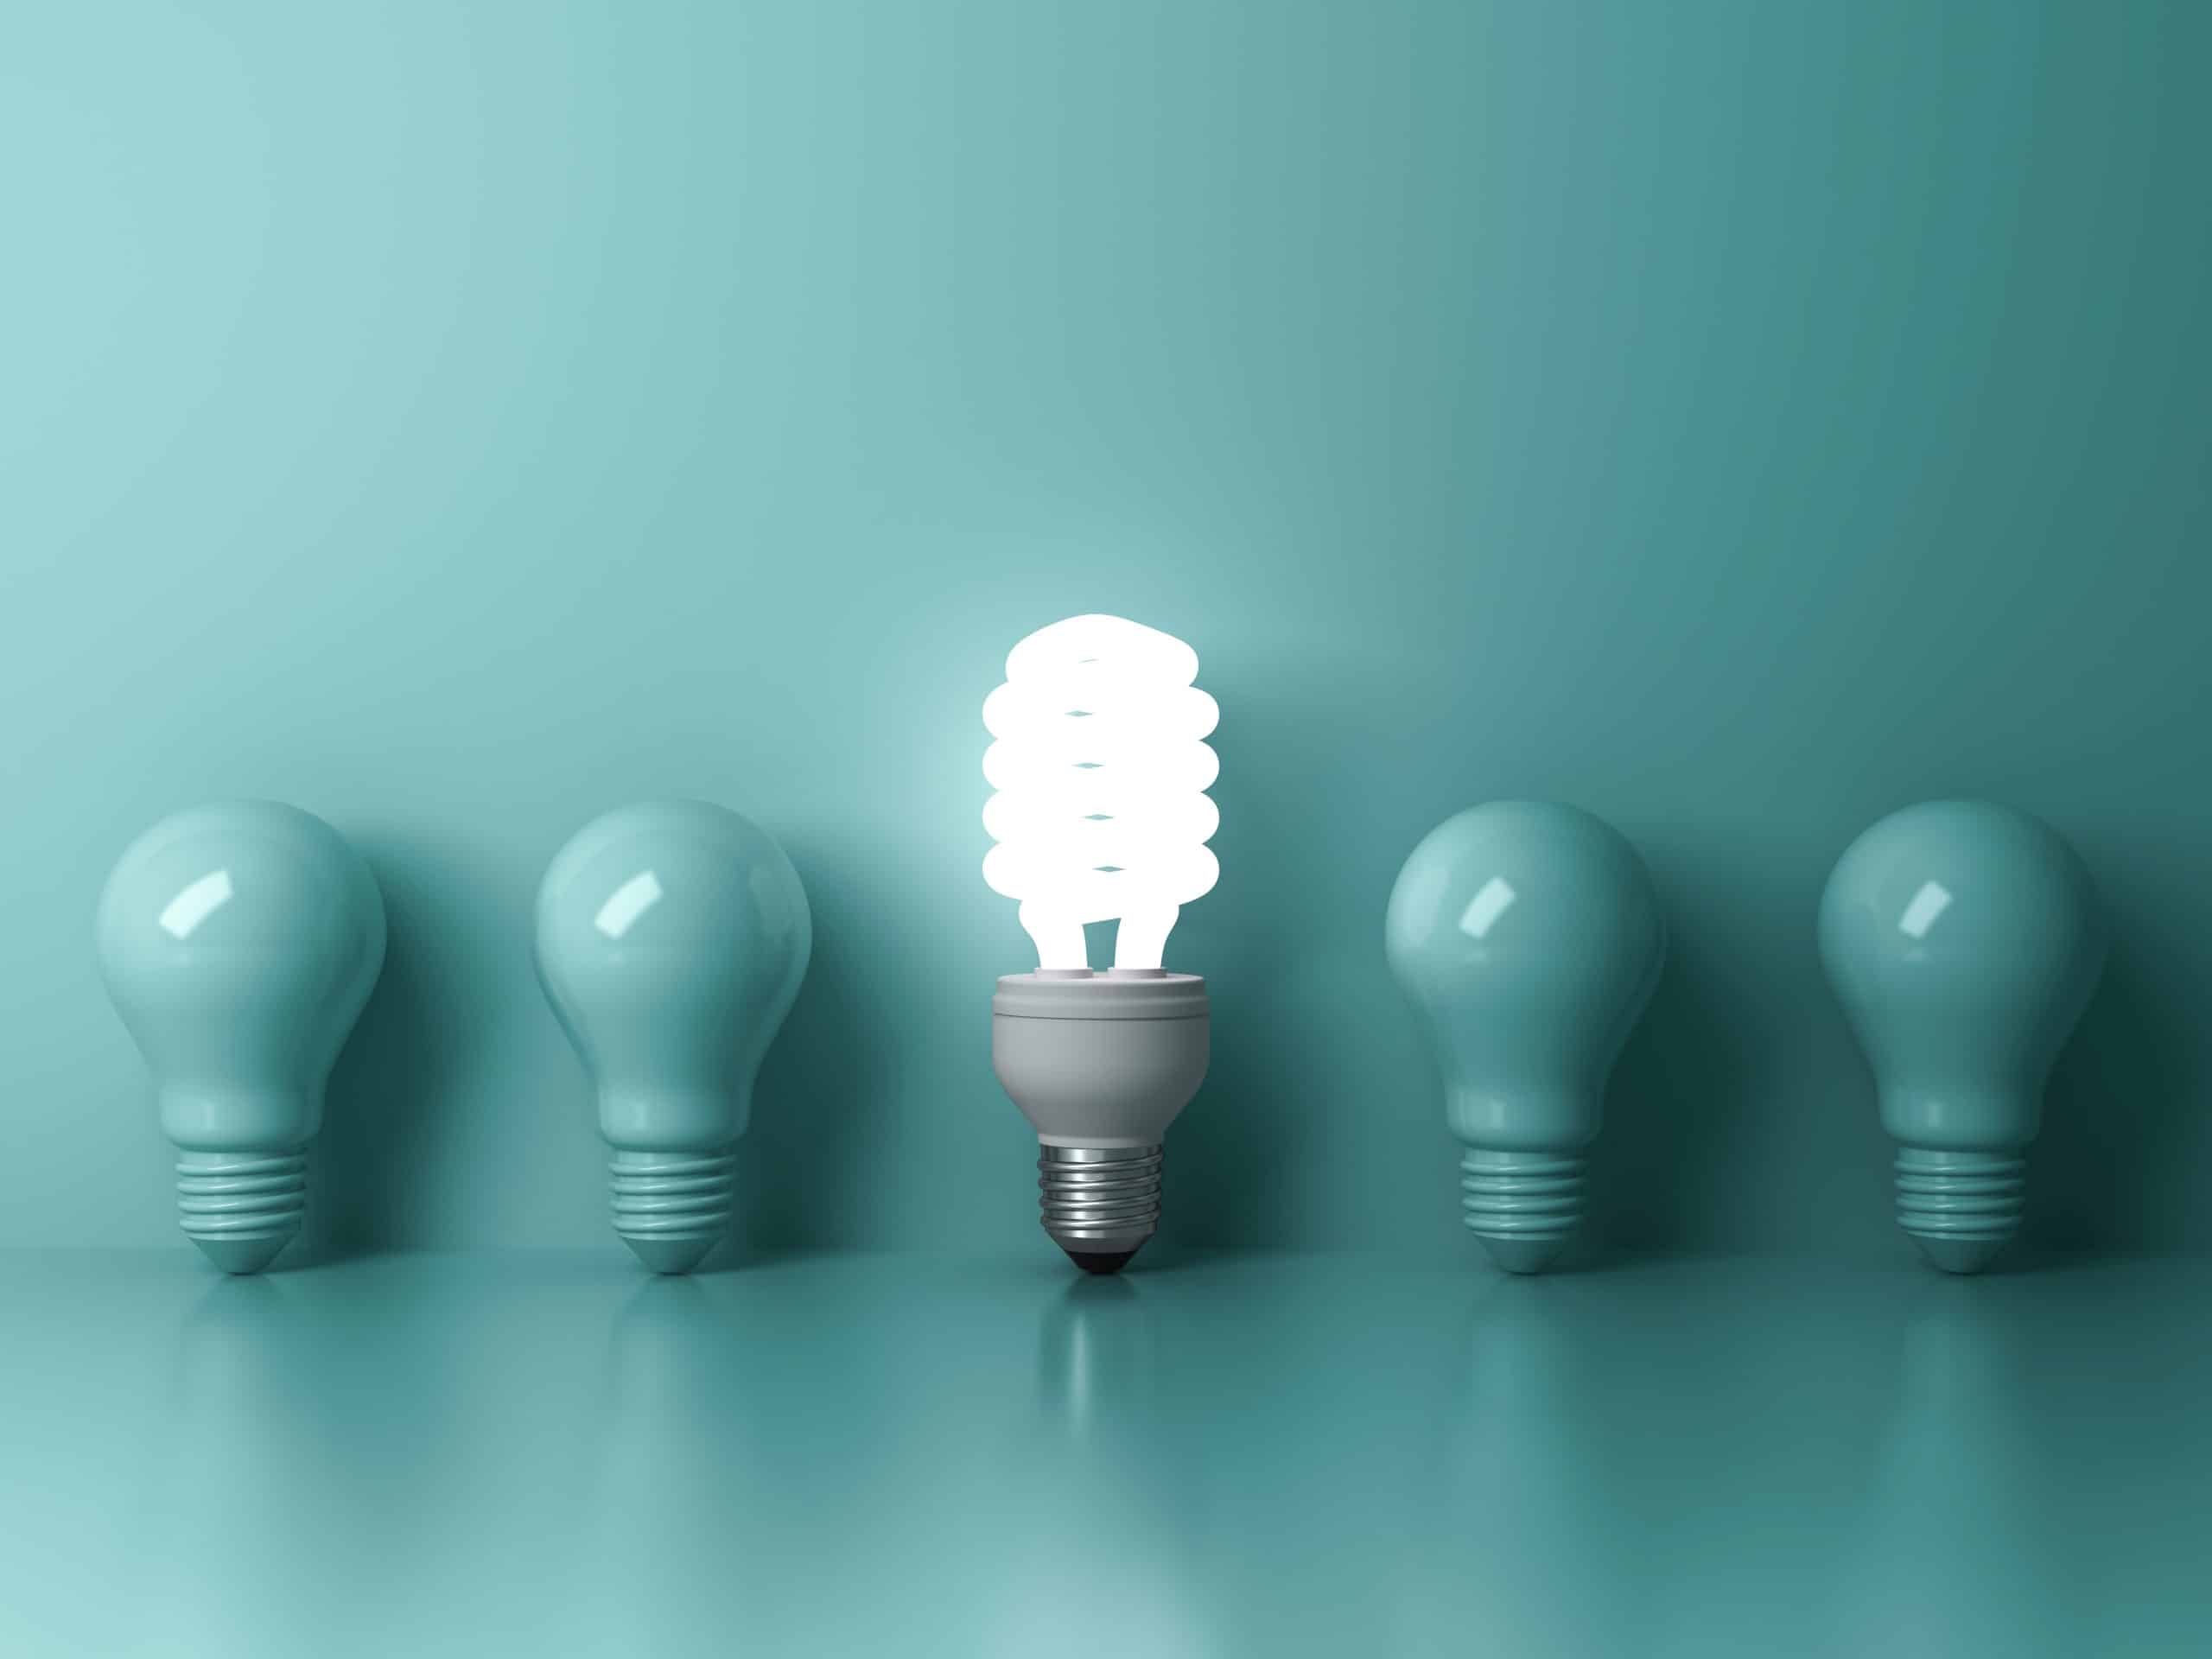 The lightbulb illustrates how HR chatbot consultants can bring bright ideas to your project